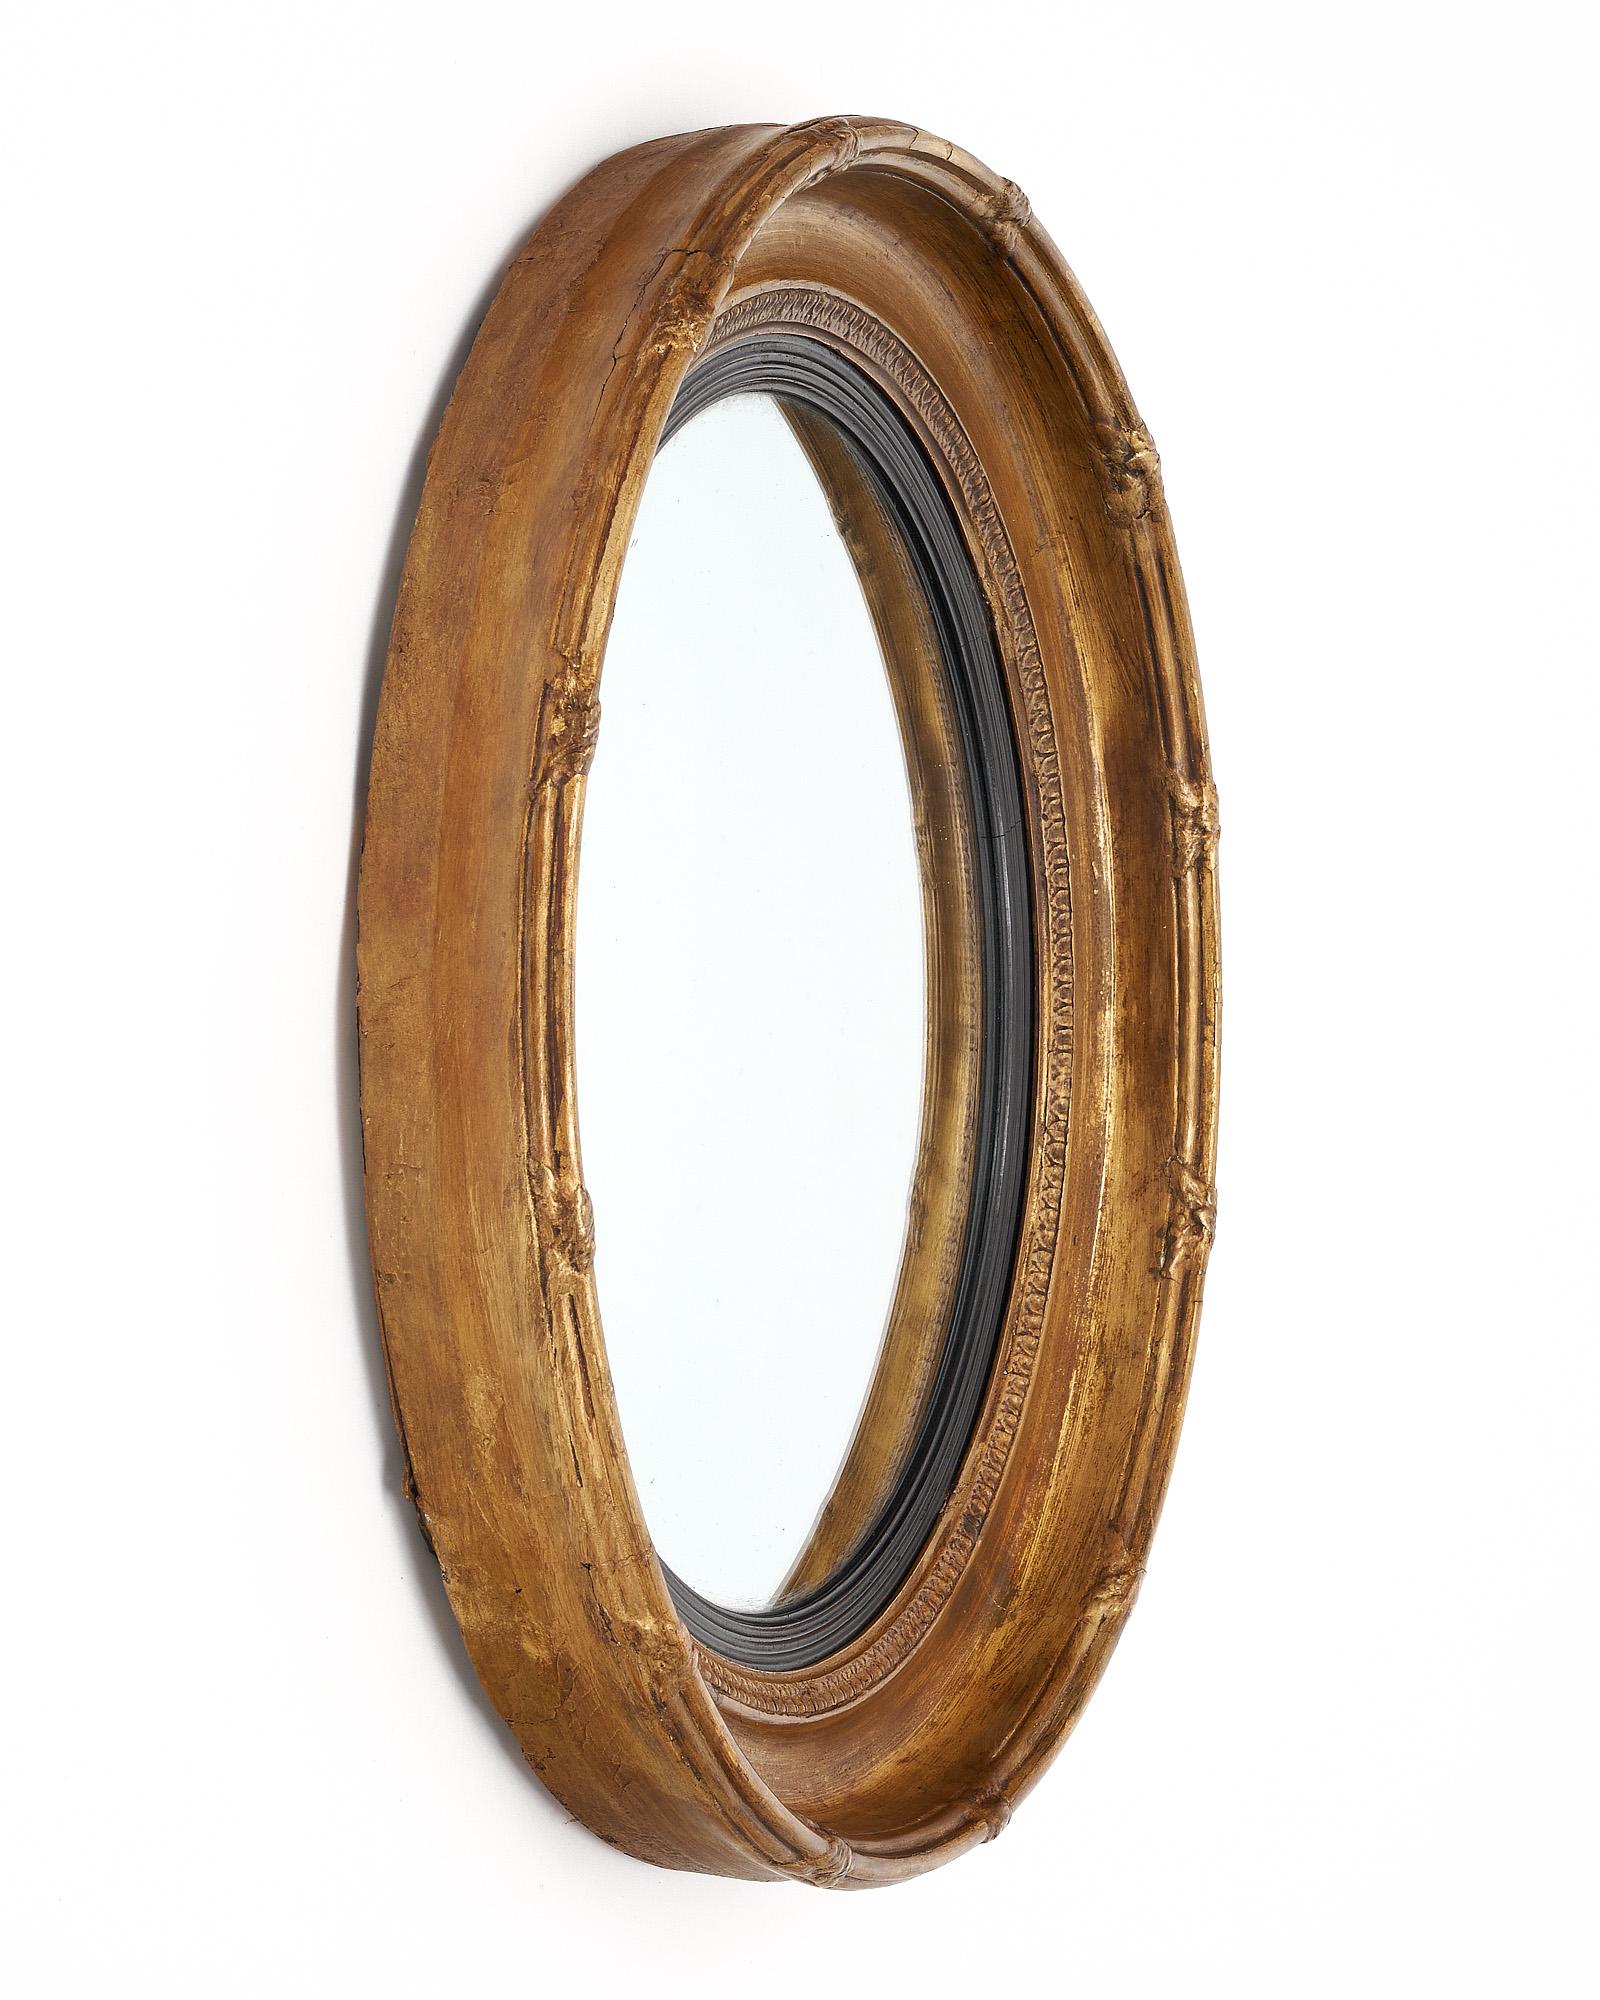 French antique circular convex mirror, all original, with a wood frame finished with 23 carat gold leafing.
